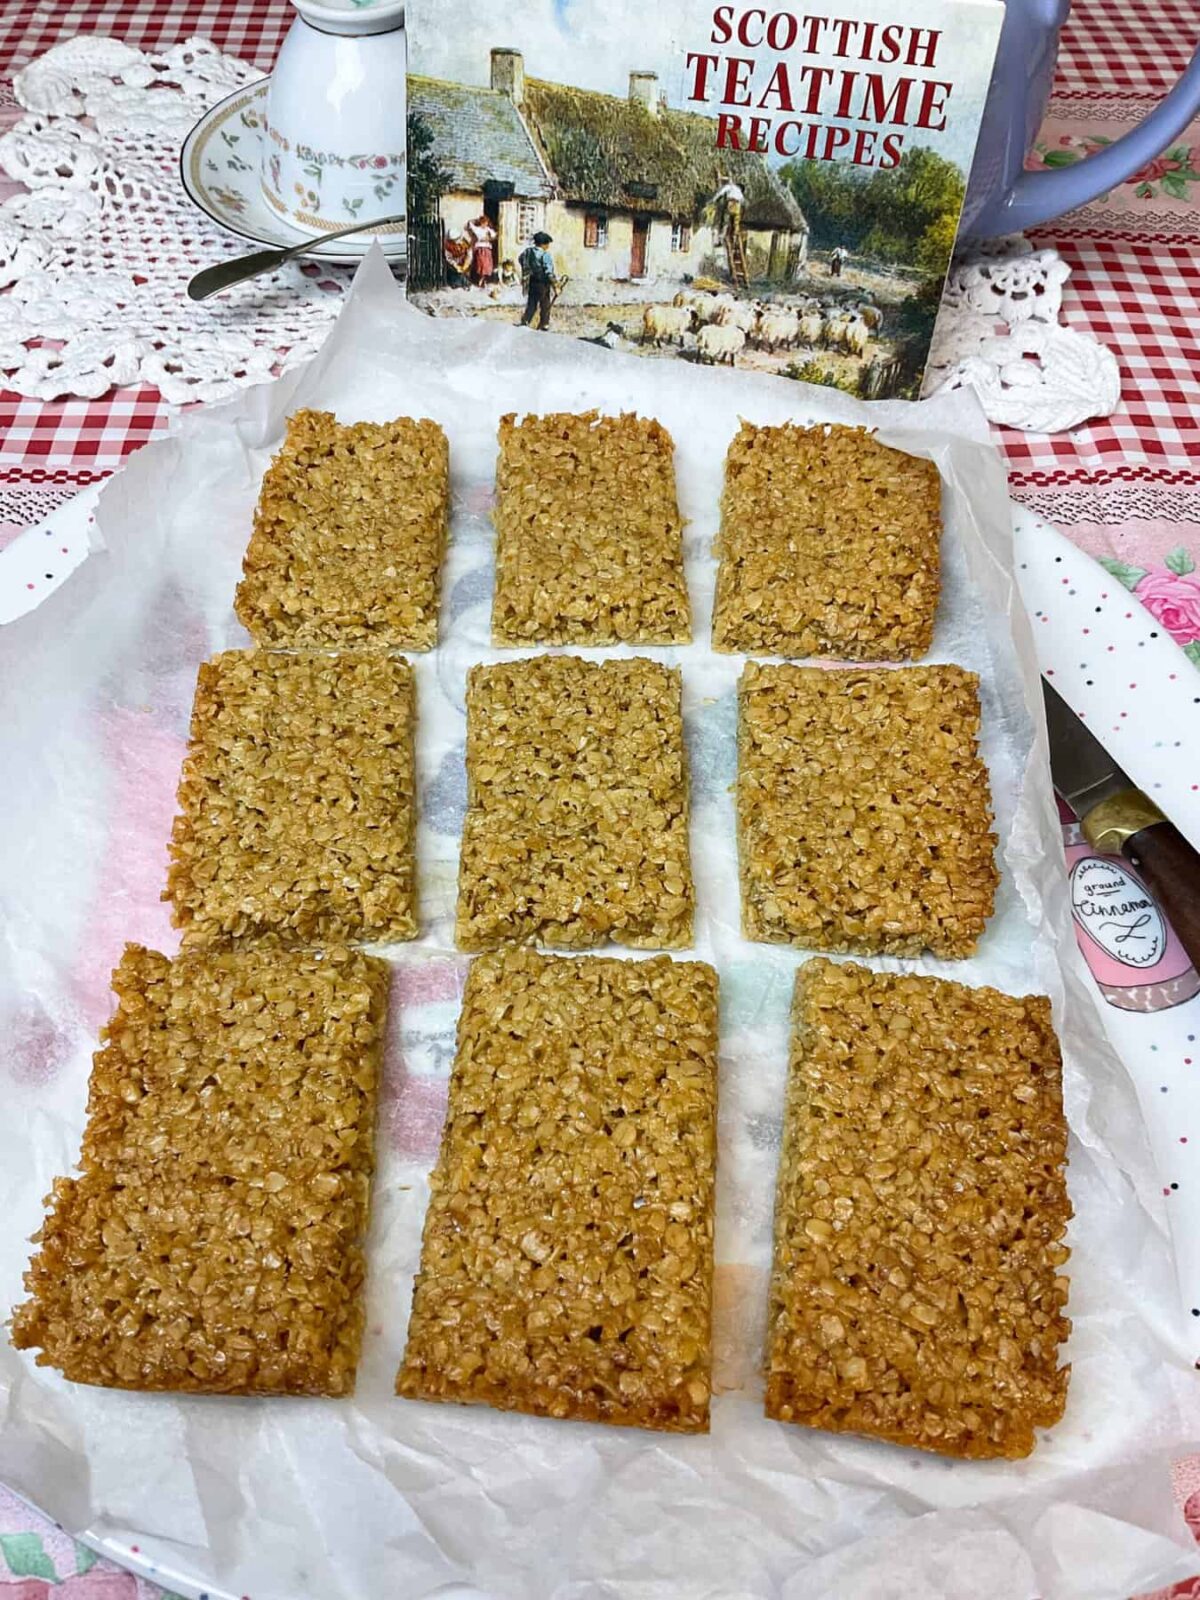 Flapjacks removed from the tin and still on baking paper, with Scottish teatime book in background.